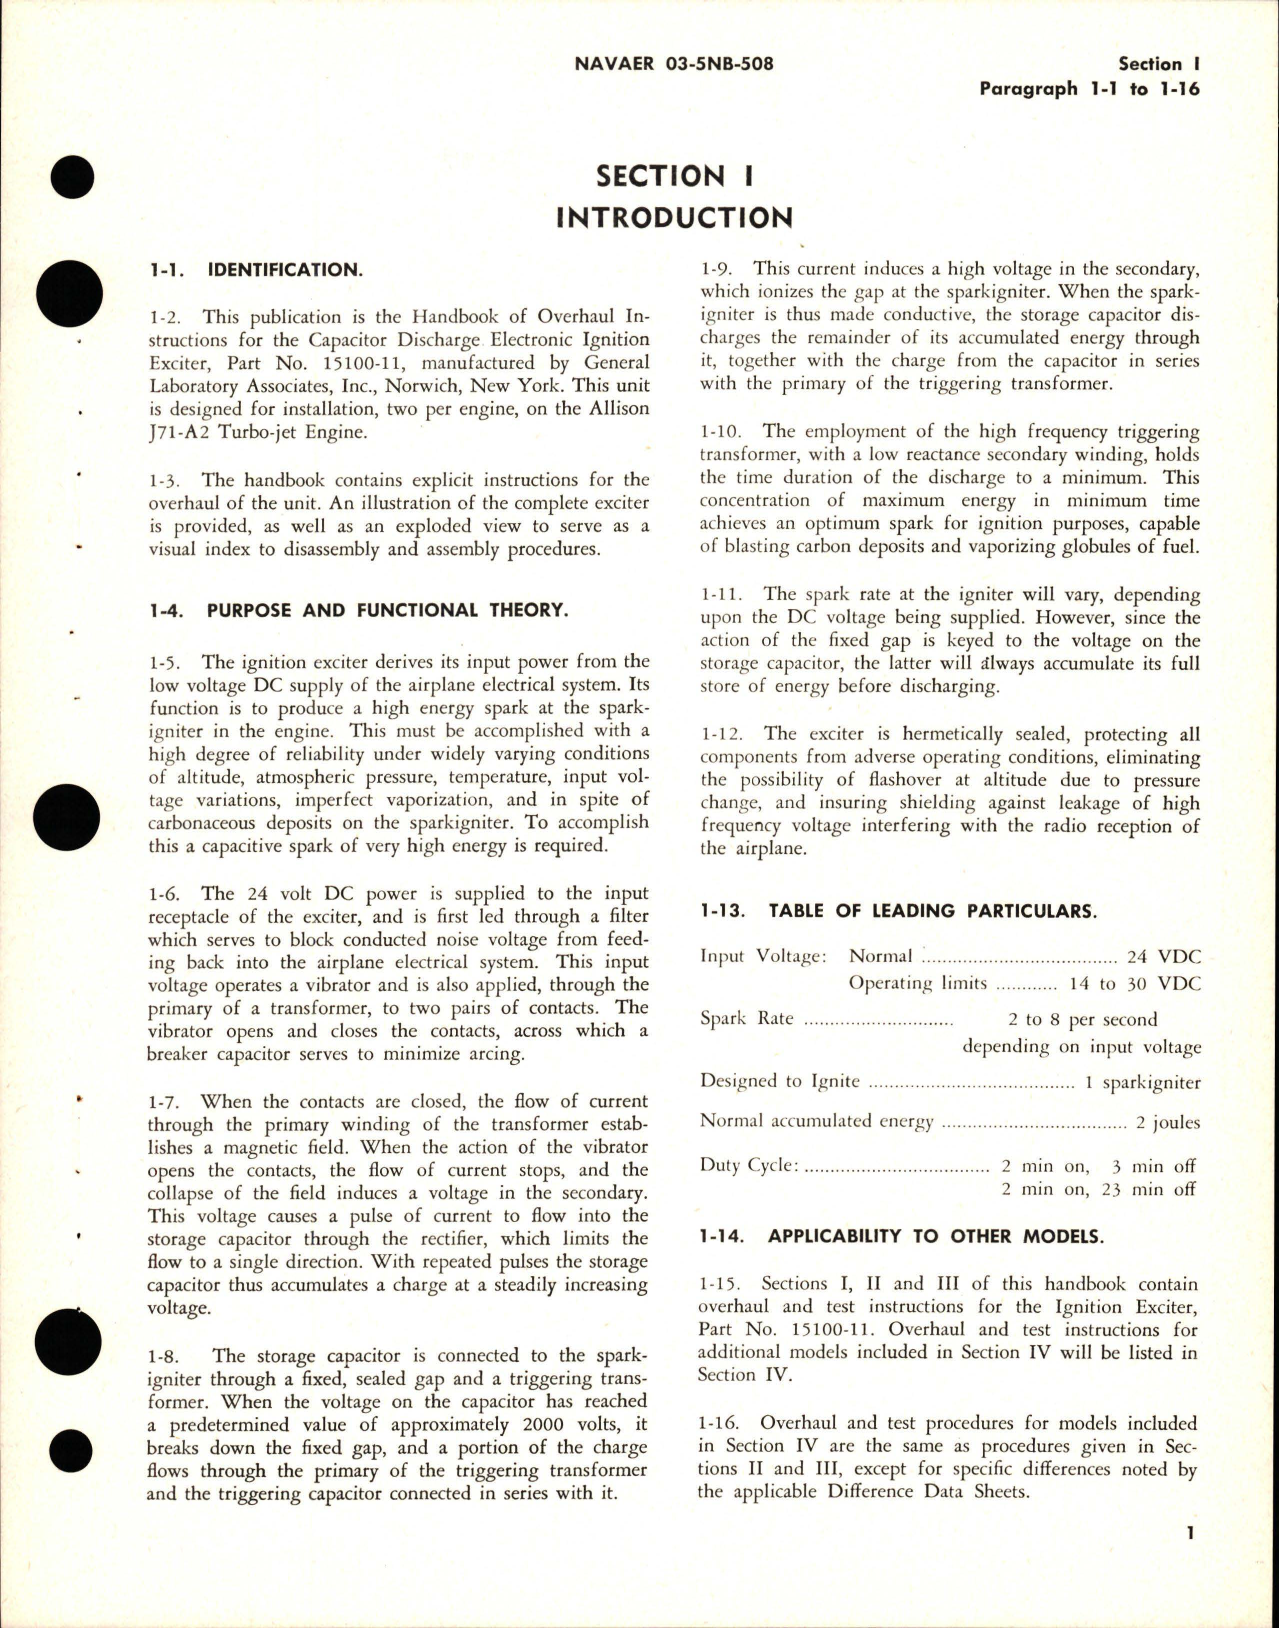 Sample page 5 from AirCorps Library document: Overhaul Instructions for Capacitor Discharge Electronic Ignition Exciter - No 15100-11